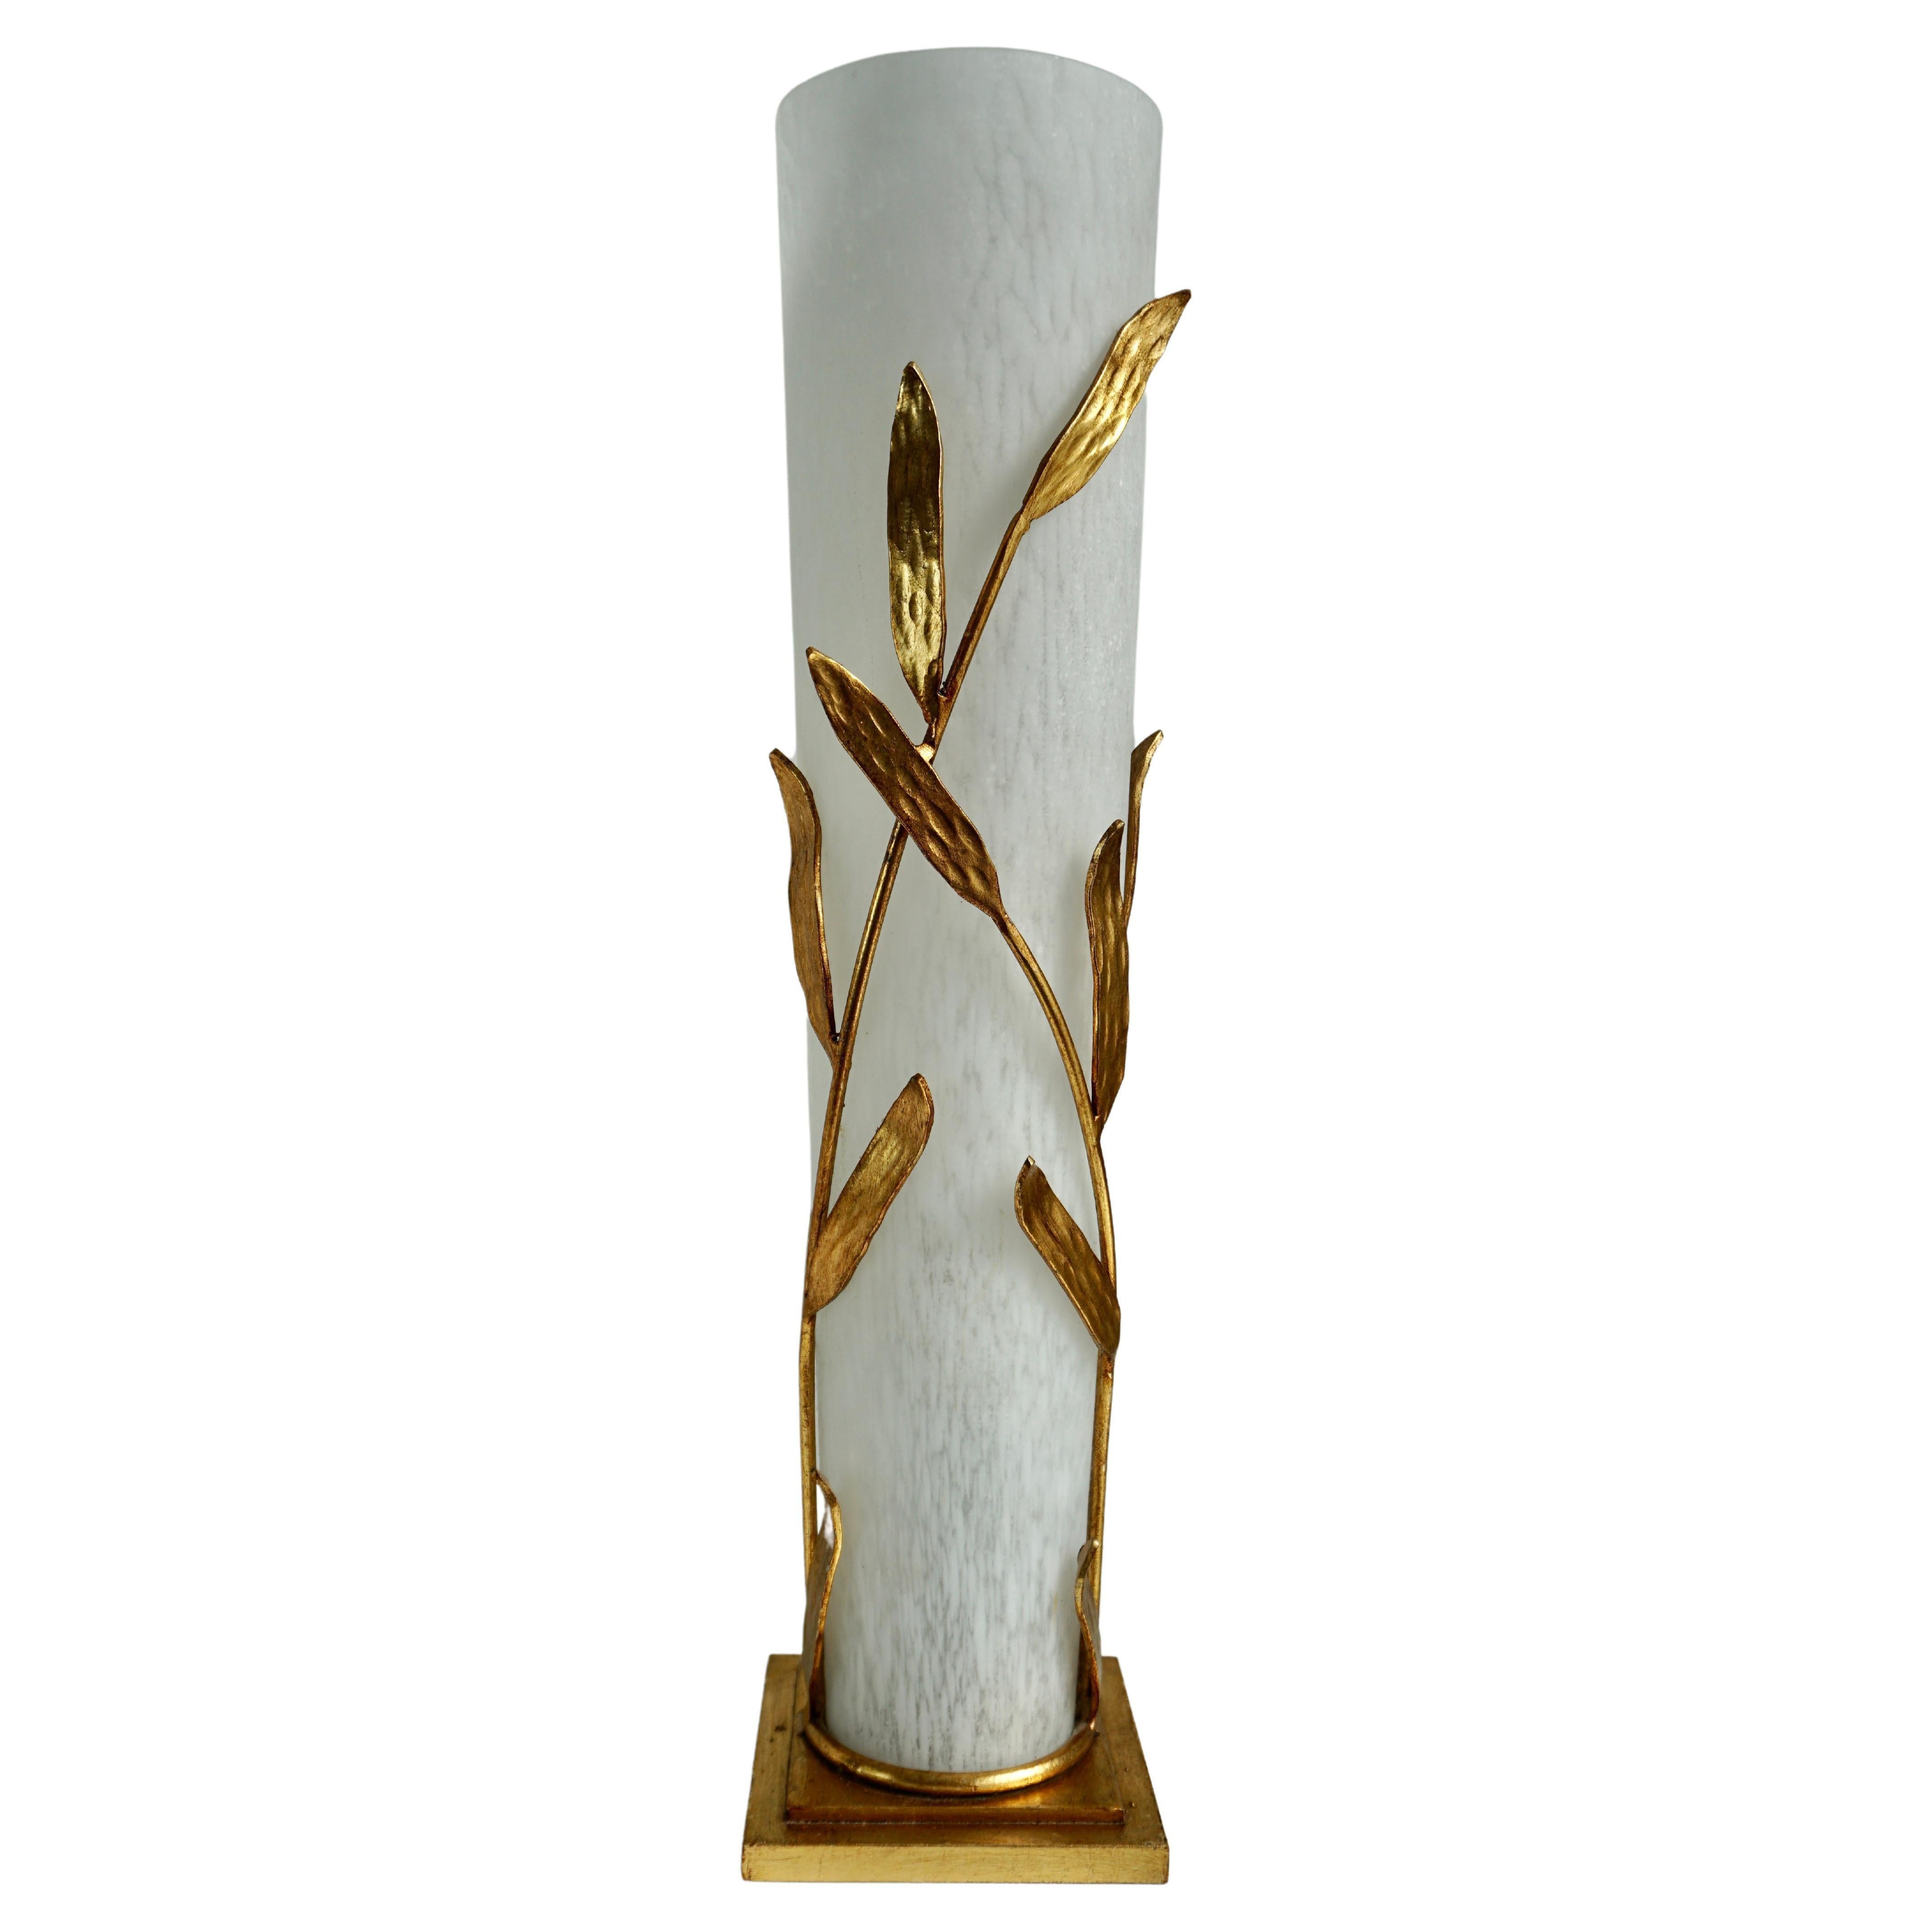 Beautiful table lamp in Murano Glass and gilded bronze leaves.

Height 67 cm.
Width 16 cm.
Depth 16 cm.

Weight 8 kg.